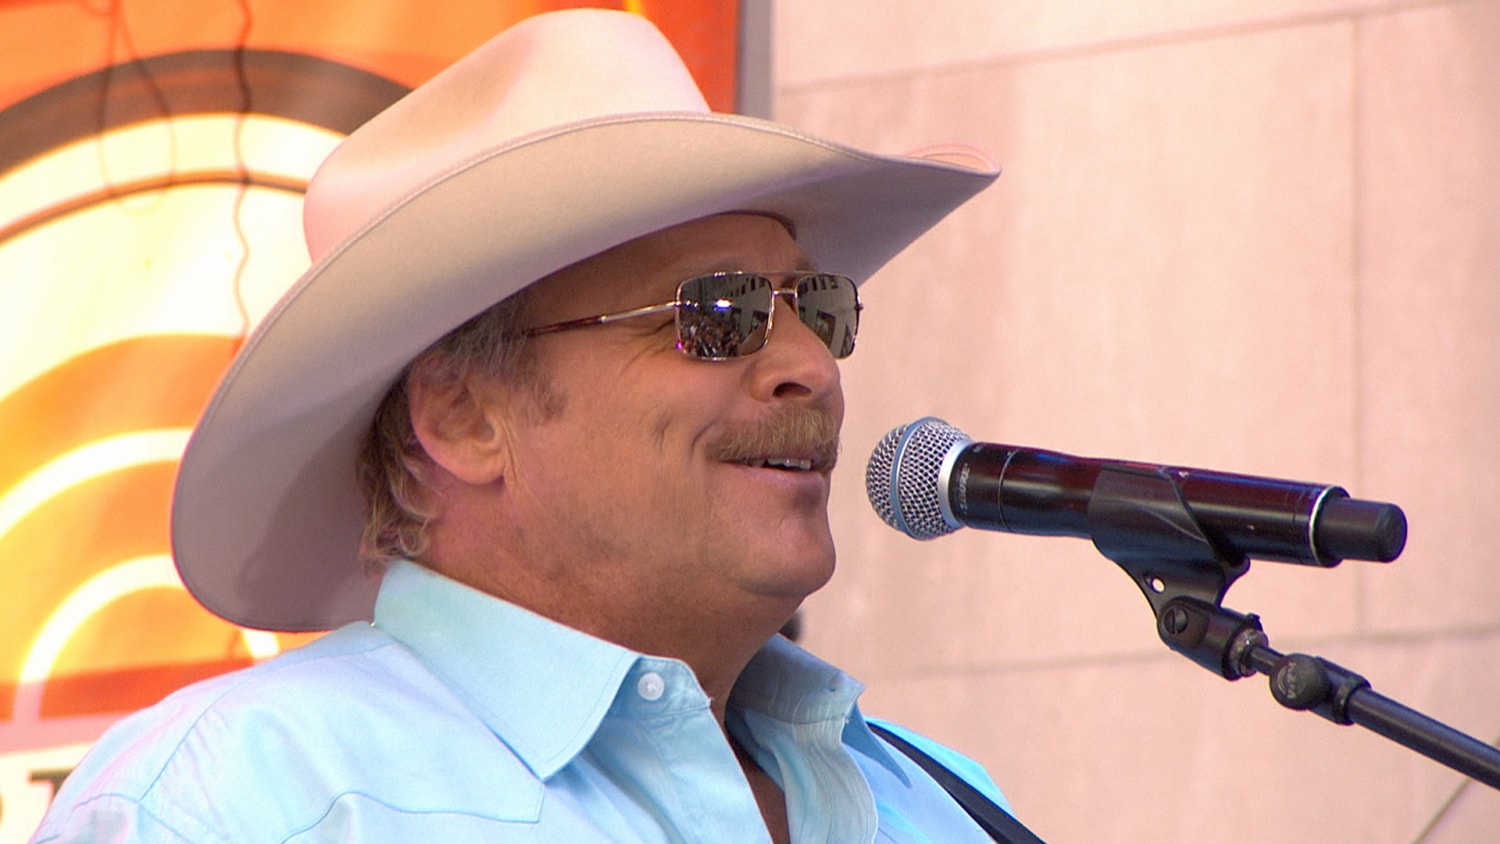 Alan Jackson health: What we know about star's condition, CMT disease